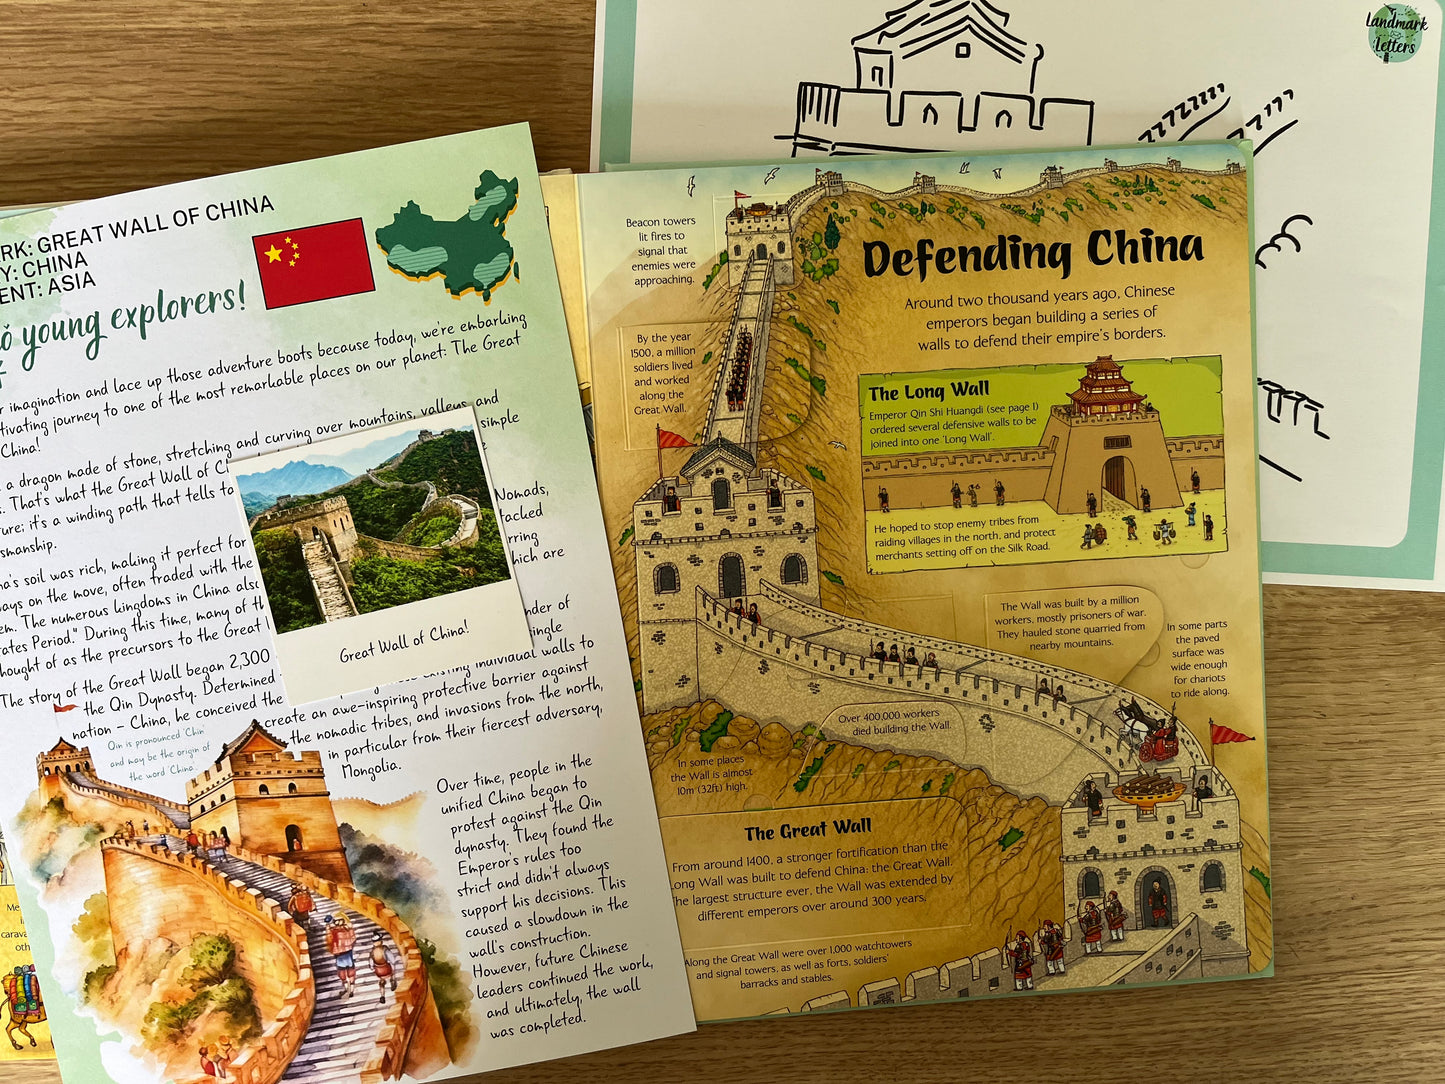 Great Wall of China Letter